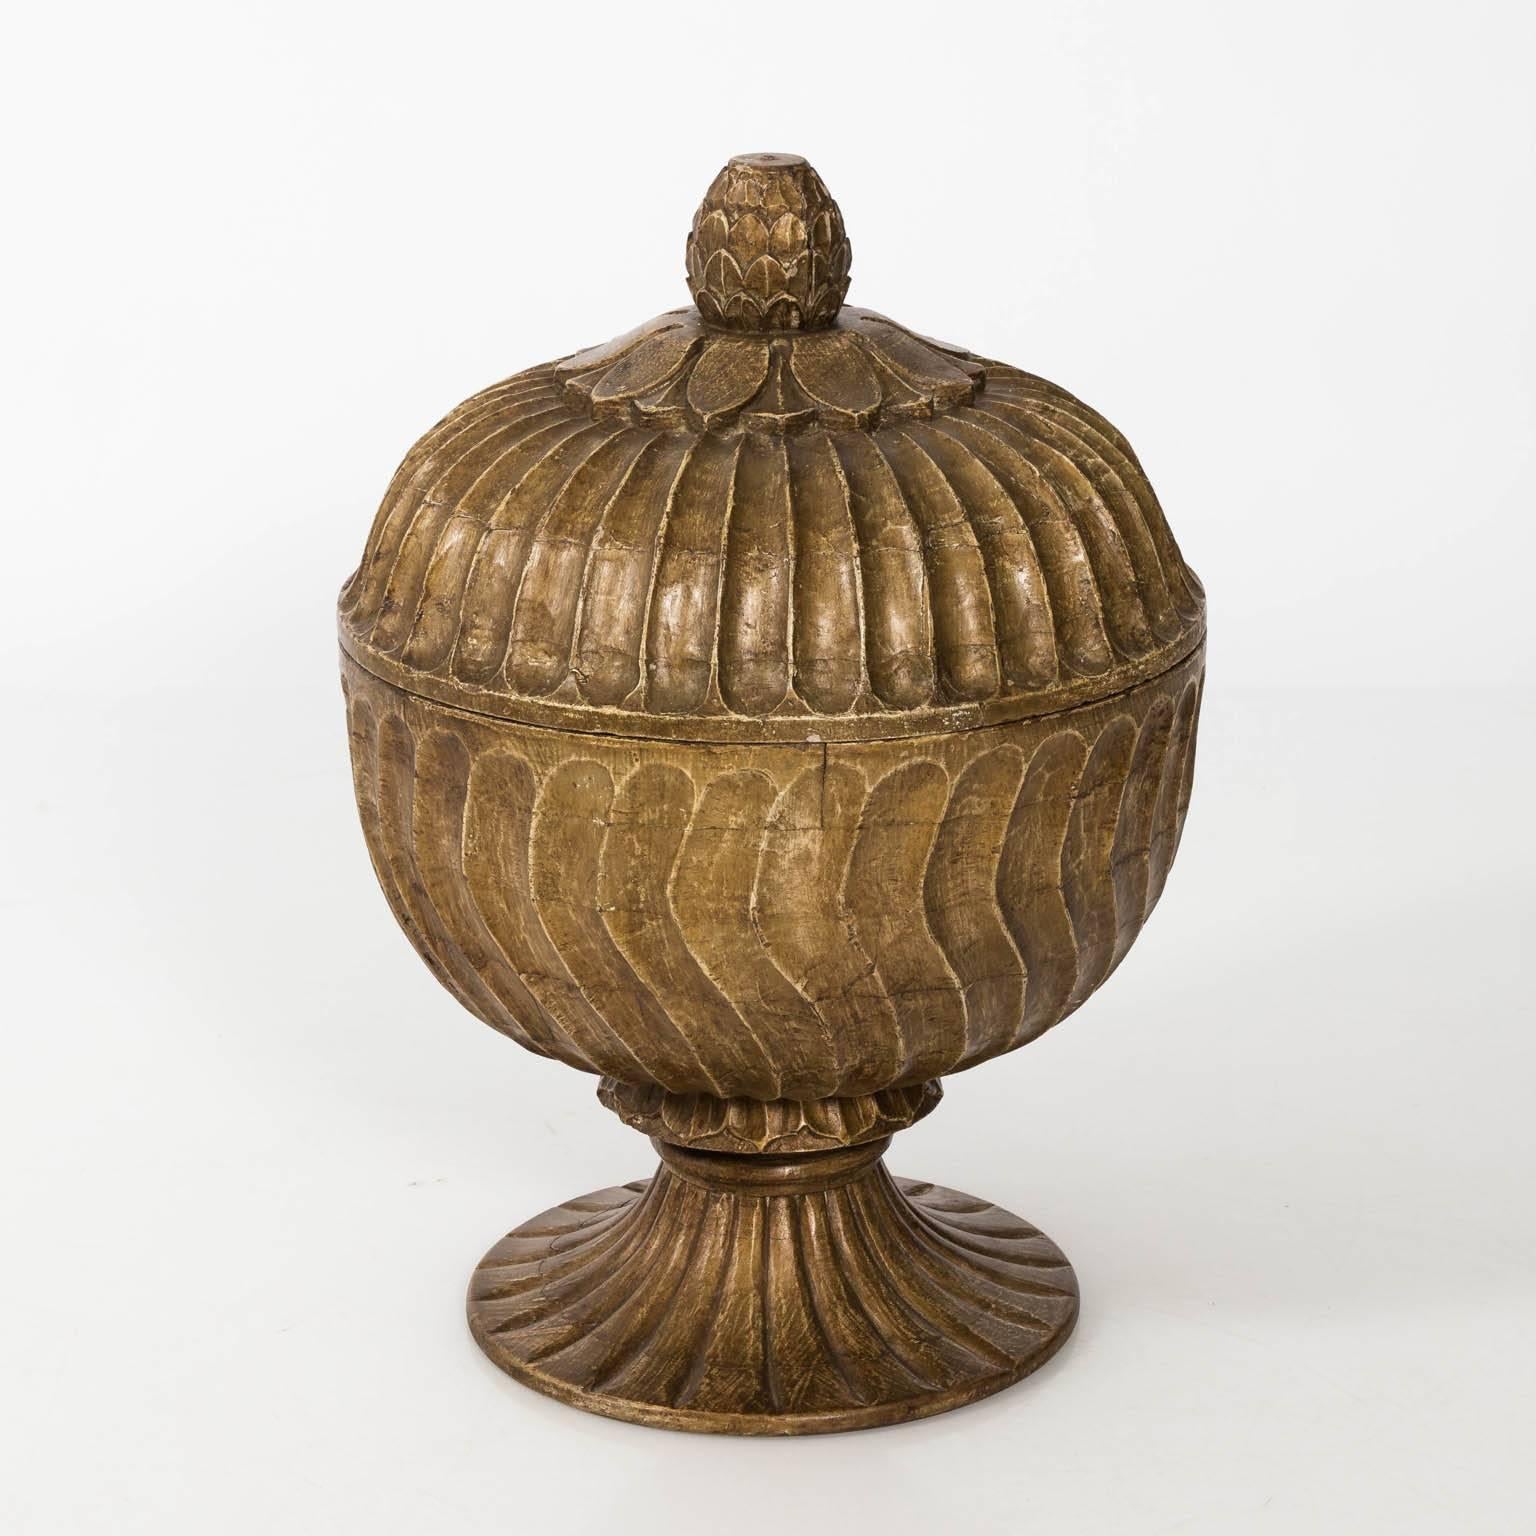 Contemporary Moroccan inspired carved wood urns with carved finial lids.
      